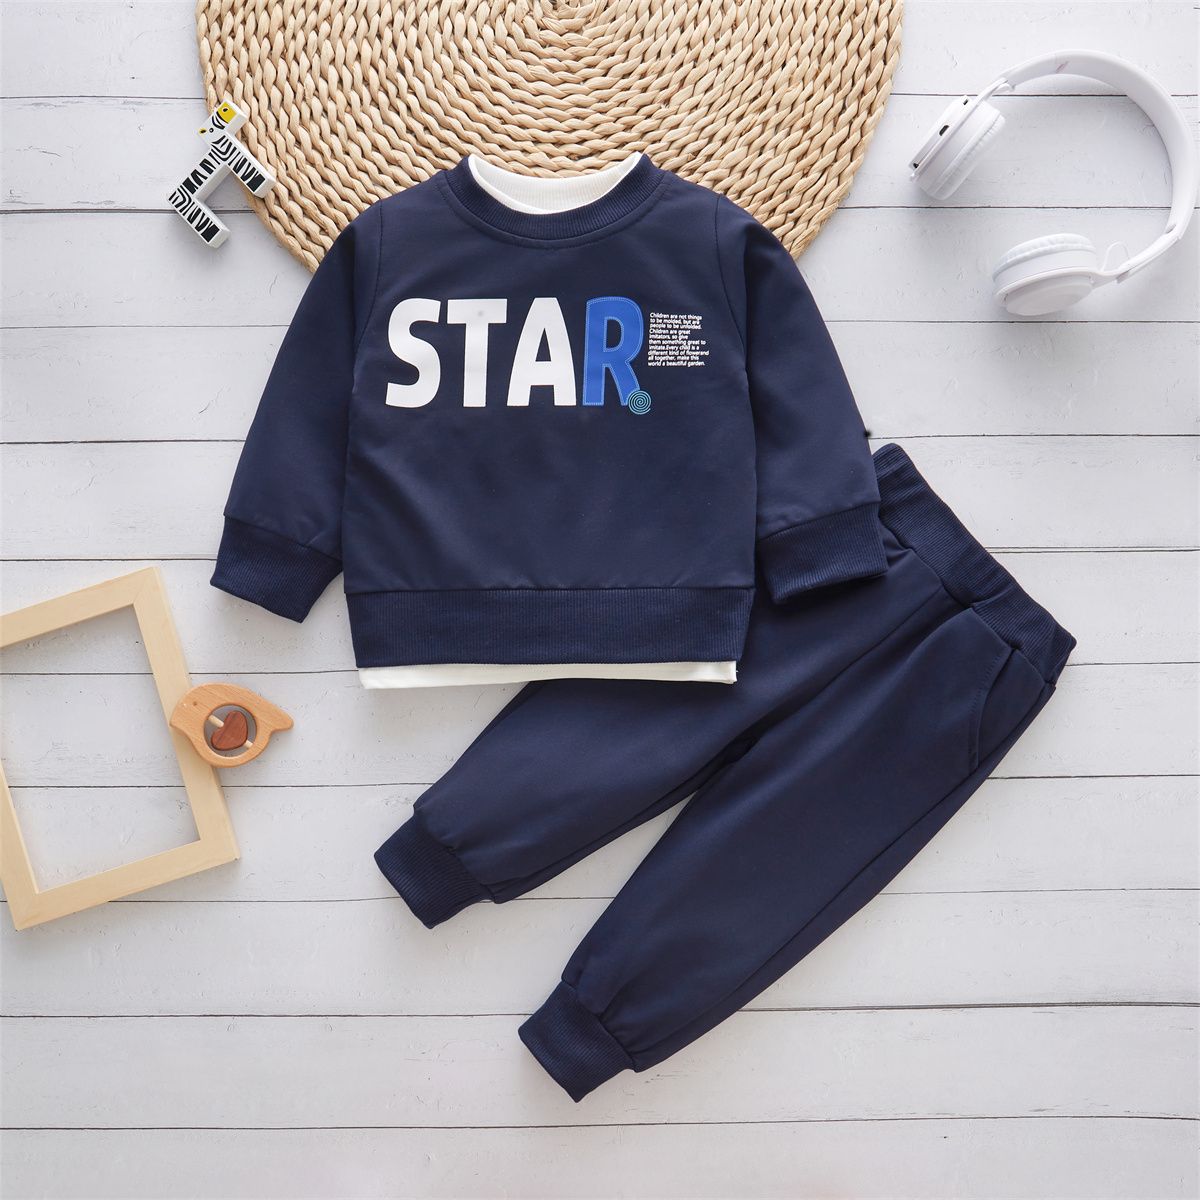 2pcs Baby Boy's Spring/Autumn Casual Letter Print Long Sleeve Top and Pants Set